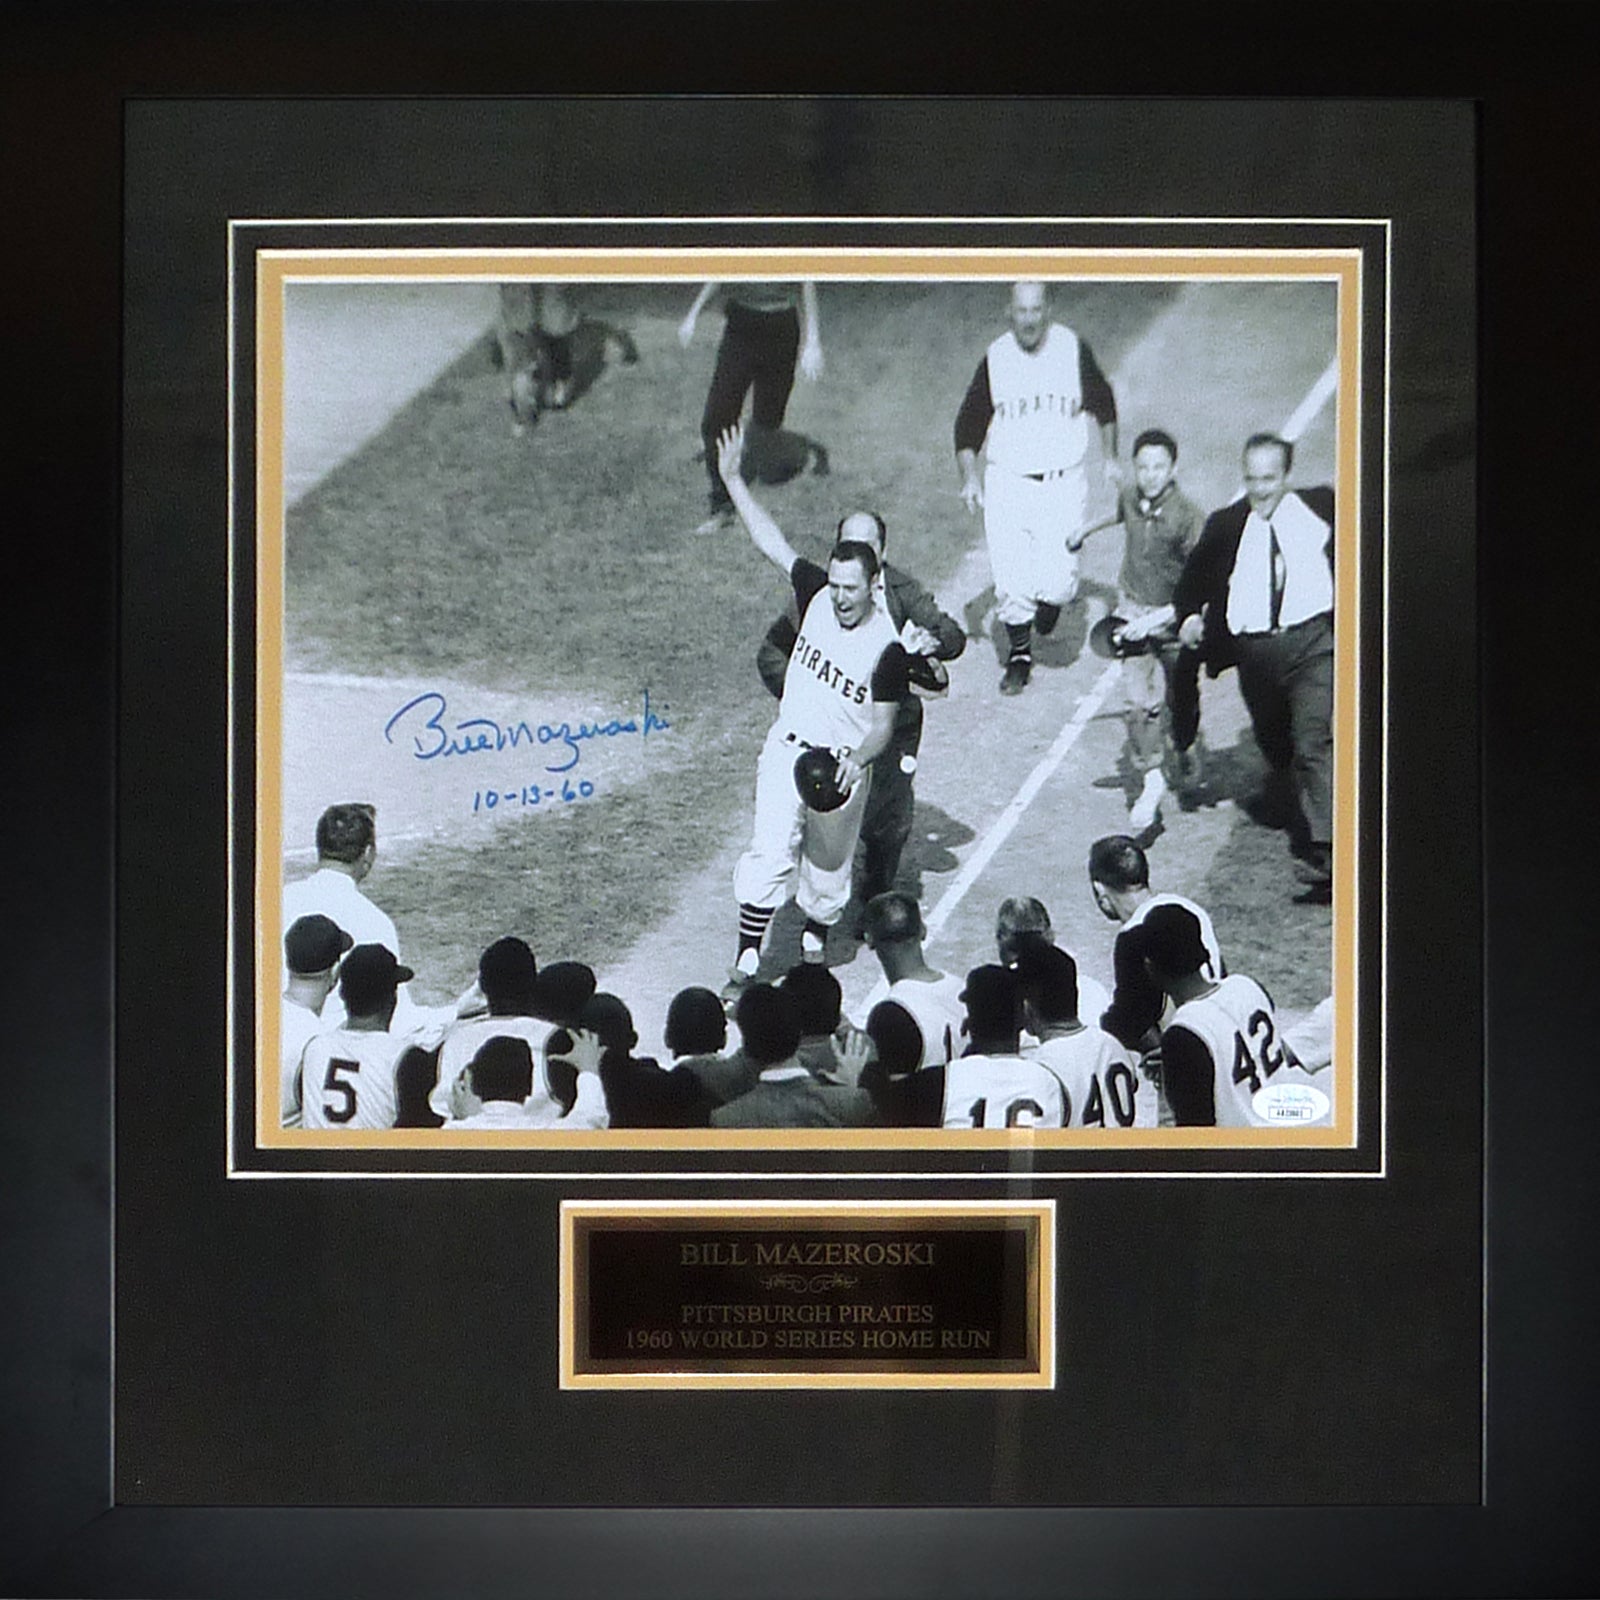 Bill Mazeroski Autographed Pittsburgh Pirates (1960 WS HR) Deluxe Framed 11x14 Photo w/ 